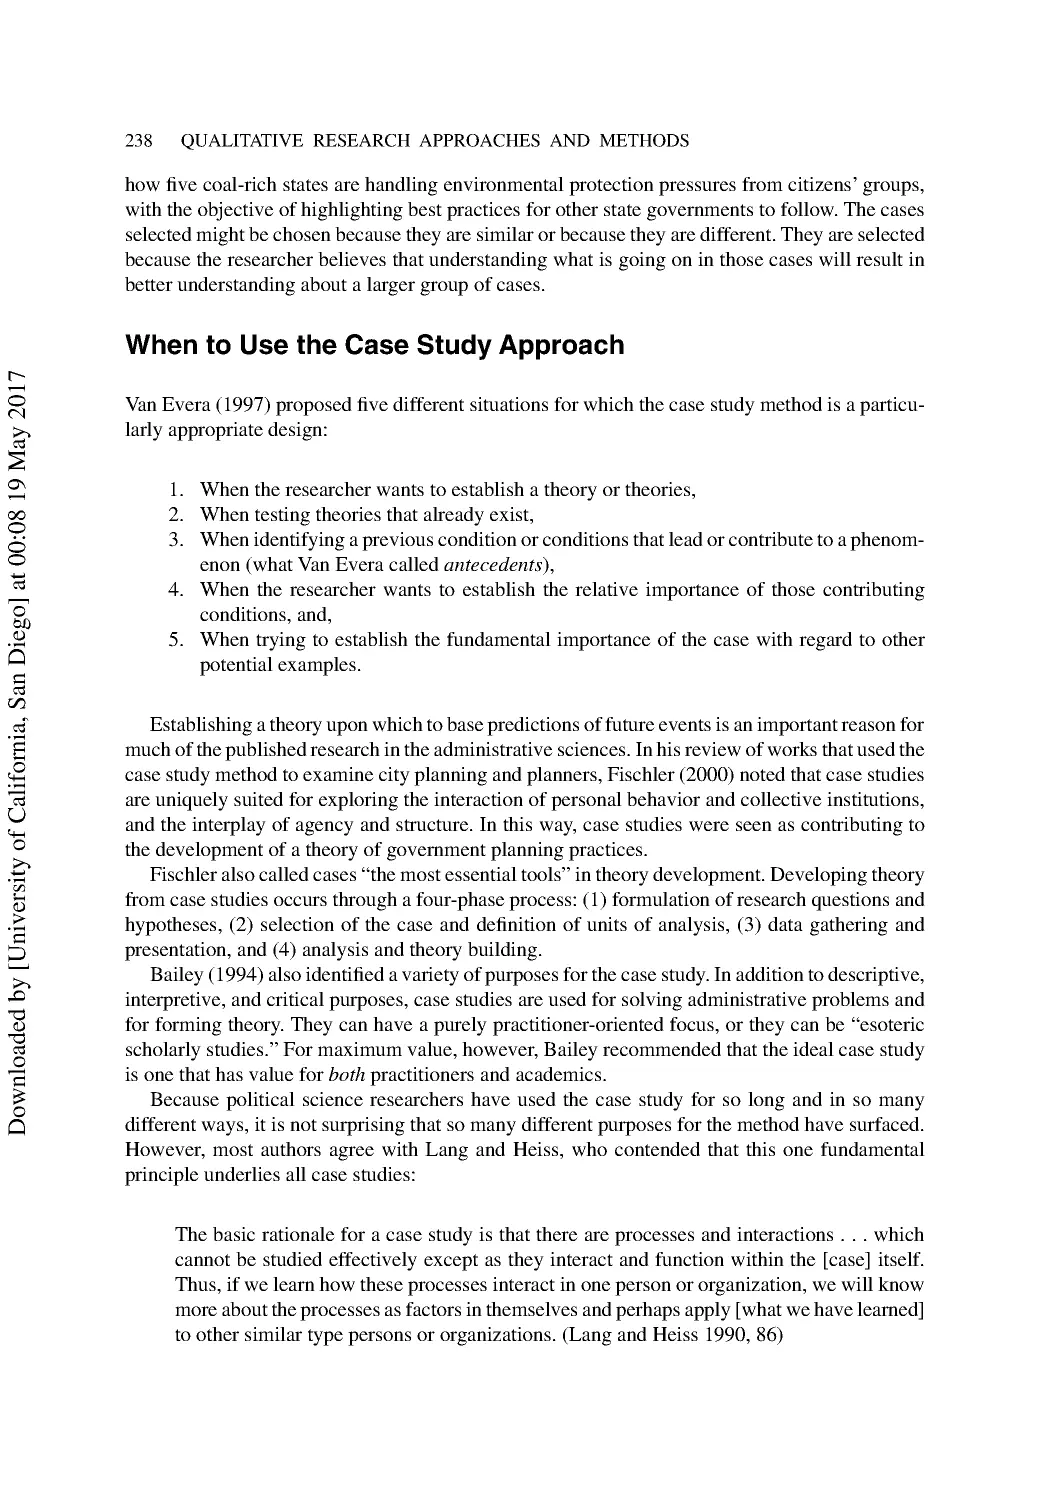 When to Use the Case Study Approach